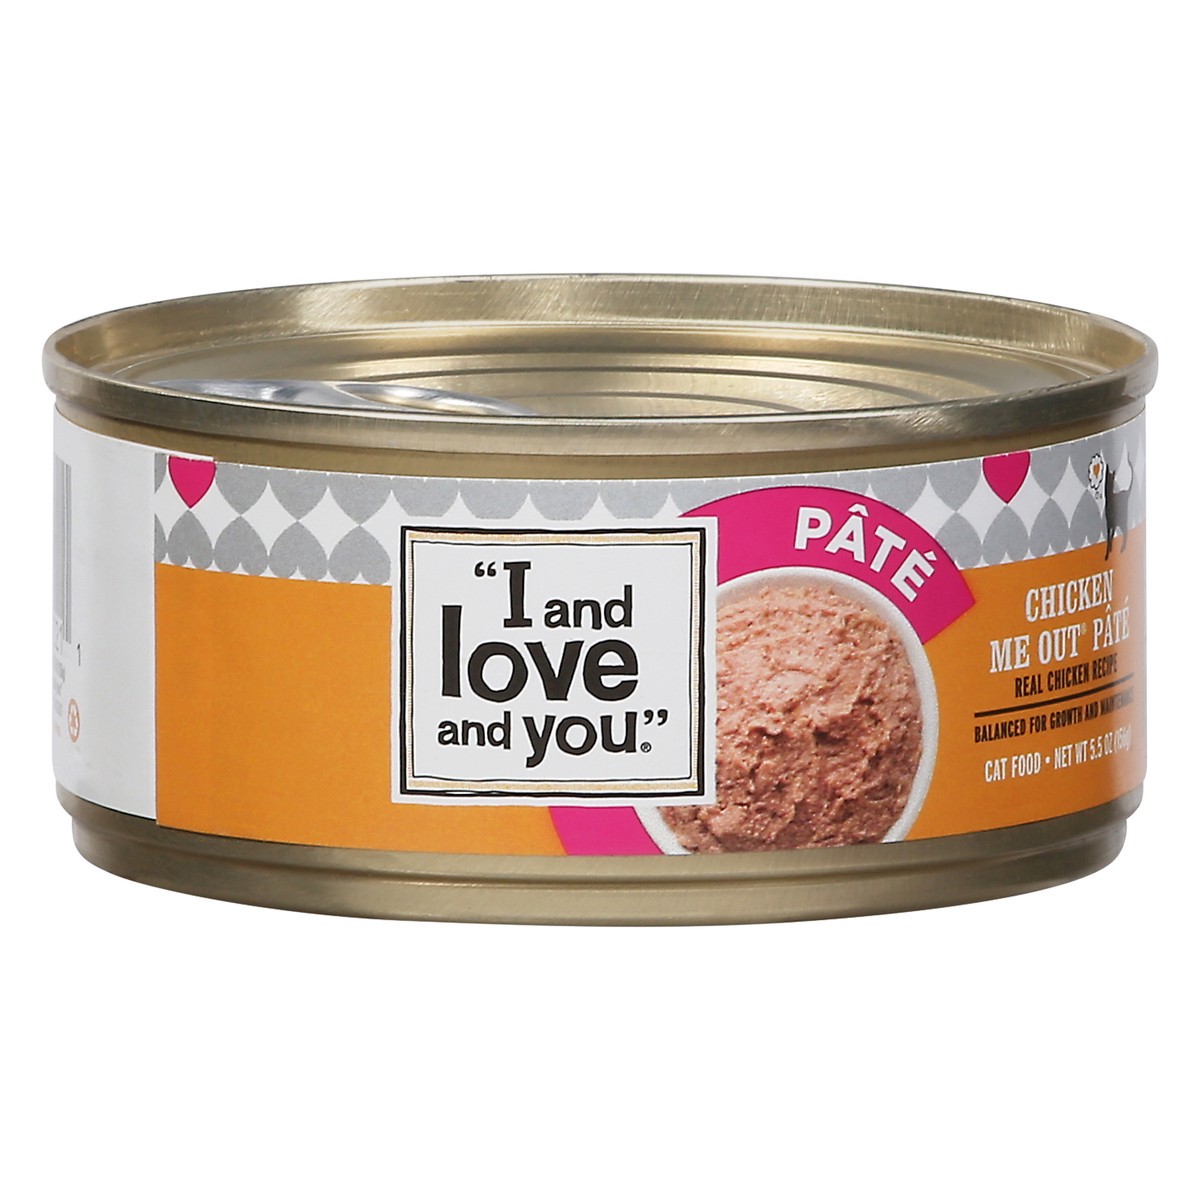 slide 1 of 15, I and Love and You Chicken Me Out Pate Cat Food 5.5 oz, 5.5 oz